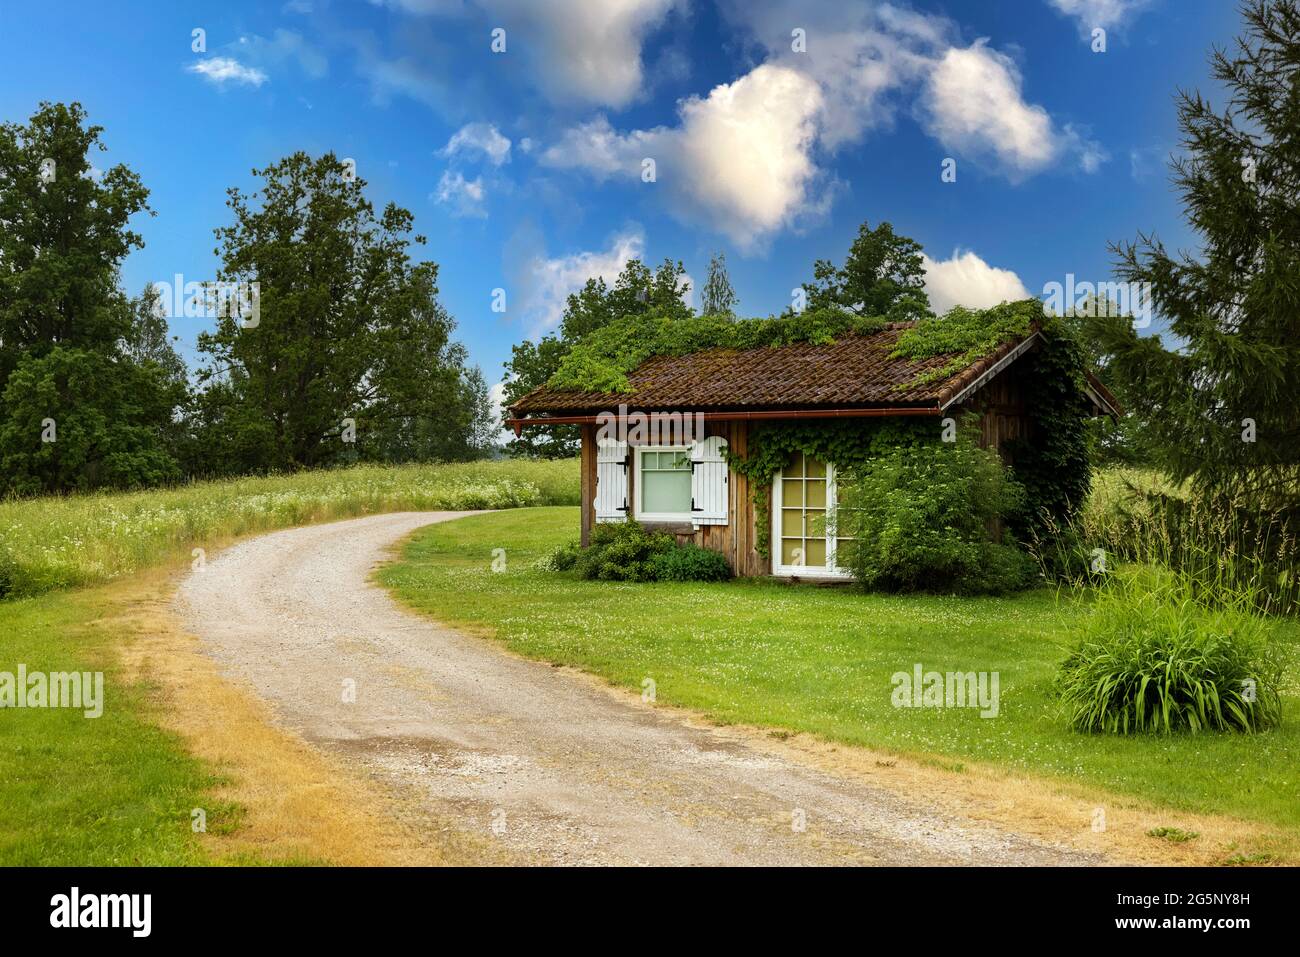 small wooden lodge and country road in countryside. idyllic landscape Stock Photo